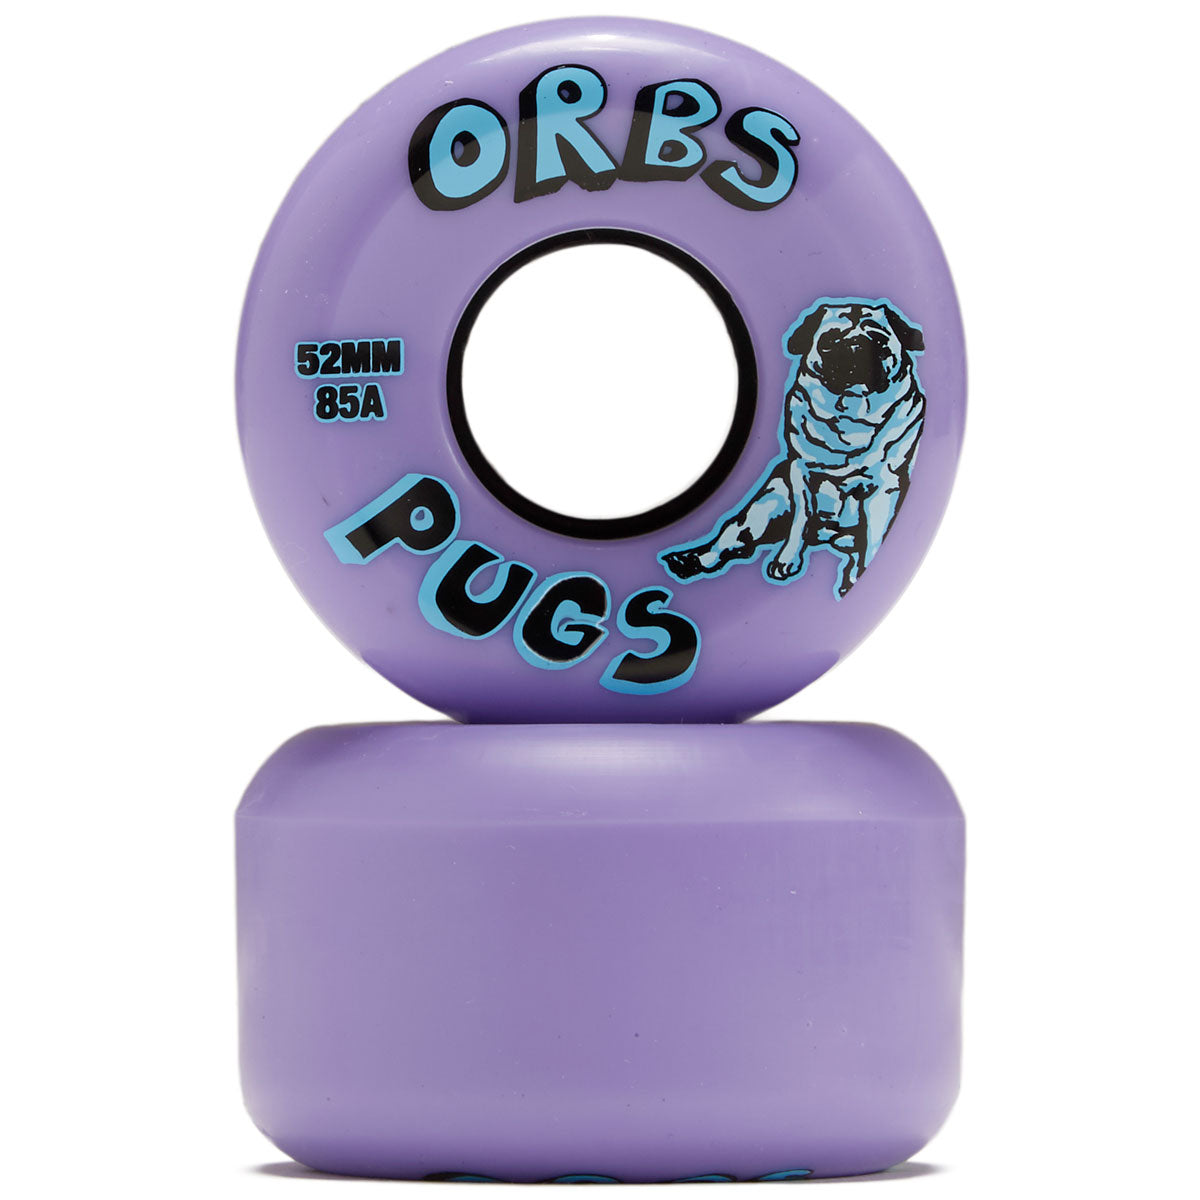 Welcome Orbs Pugs Conical 85A Skateboard Wheels - Lavender - 52mm image 2